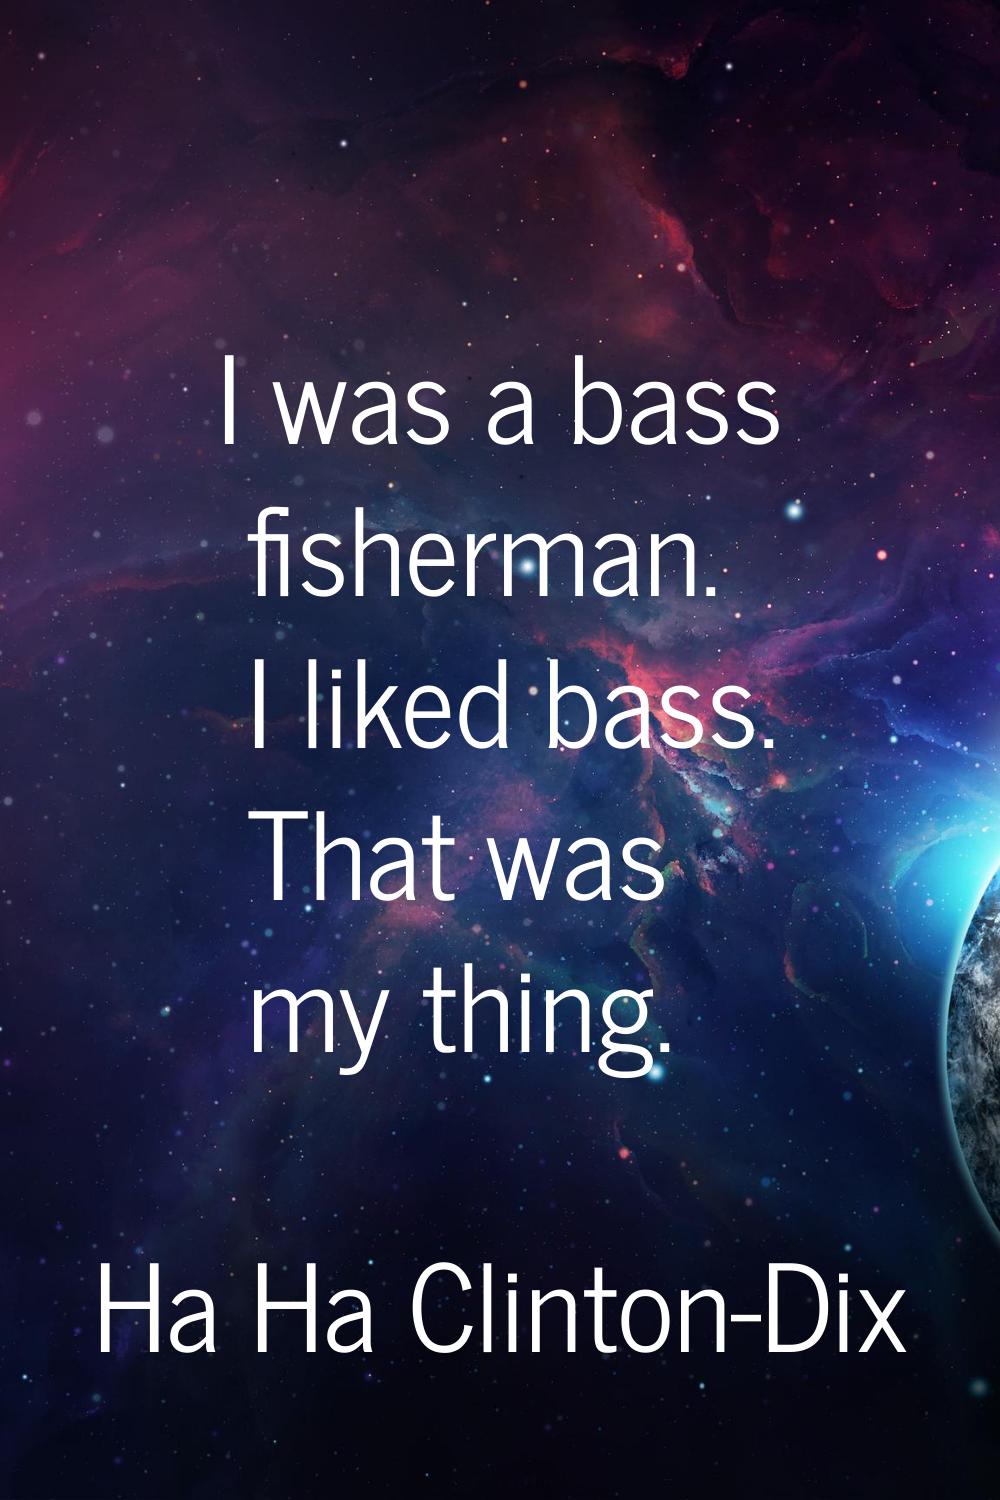 I was a bass fisherman. I liked bass. That was my thing.